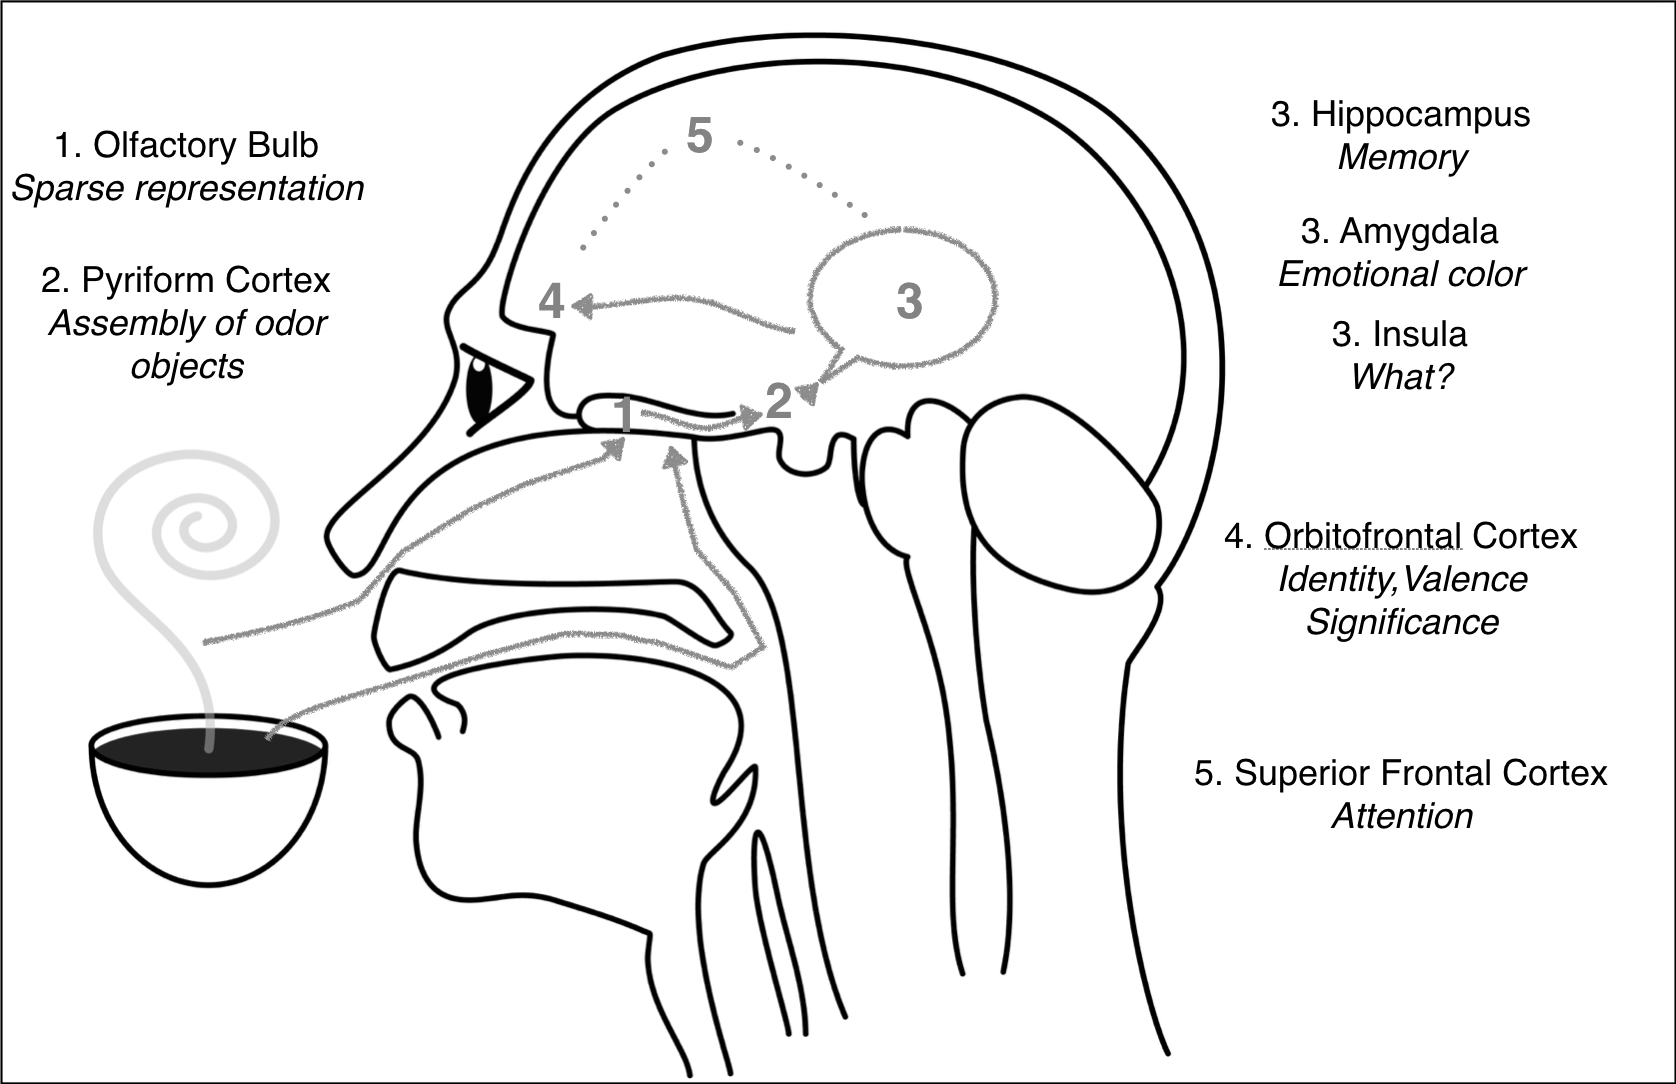 Diagram of the perception of smell in the nose and brain